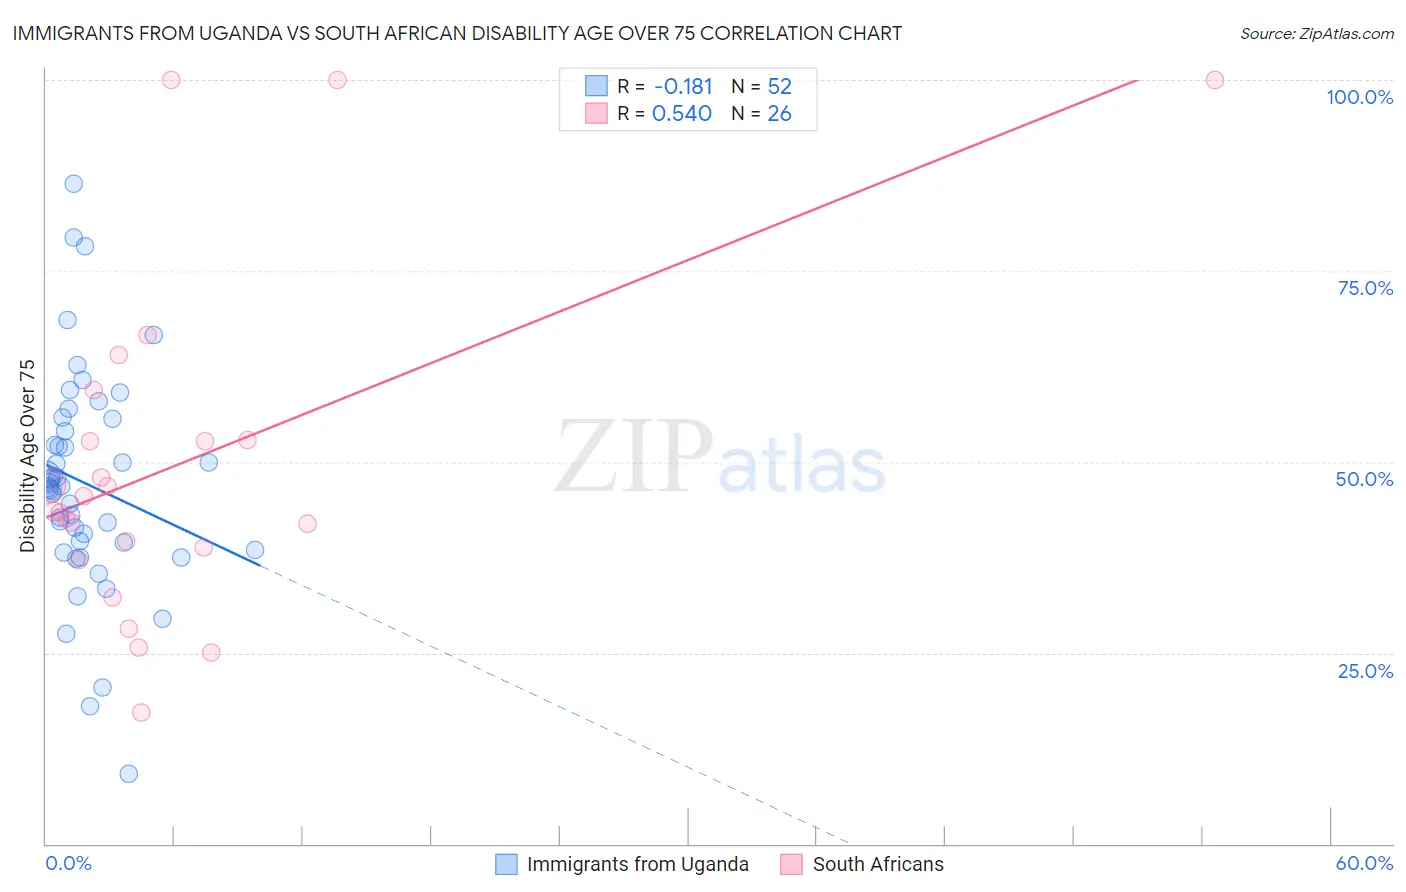 Immigrants from Uganda vs South African Disability Age Over 75